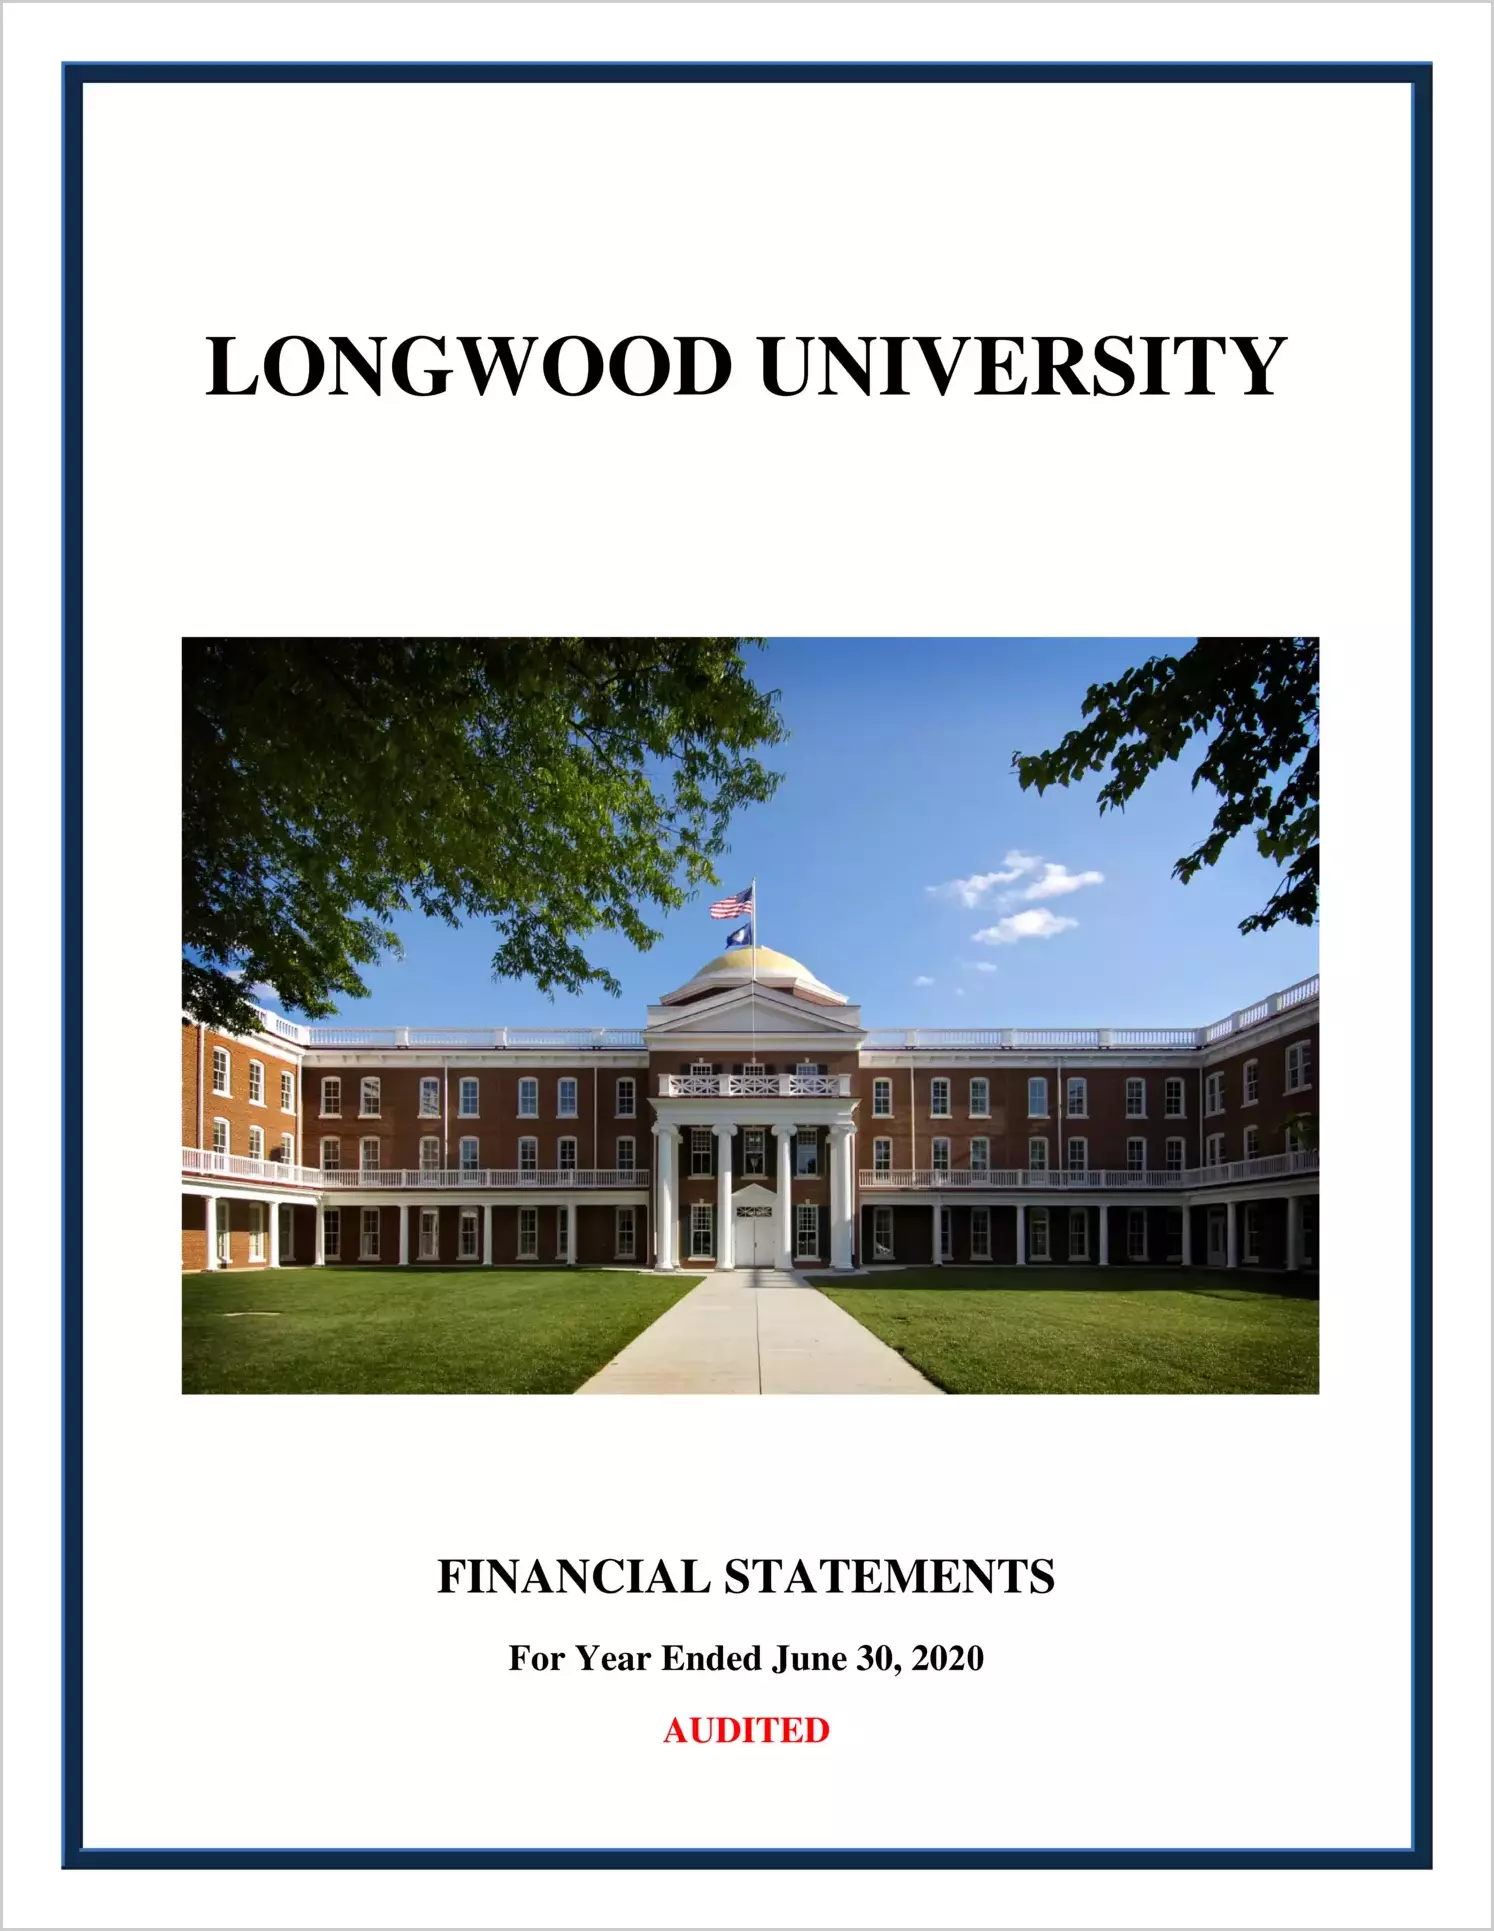 Longwood University Financial Statements for the year ended June 30, 2020